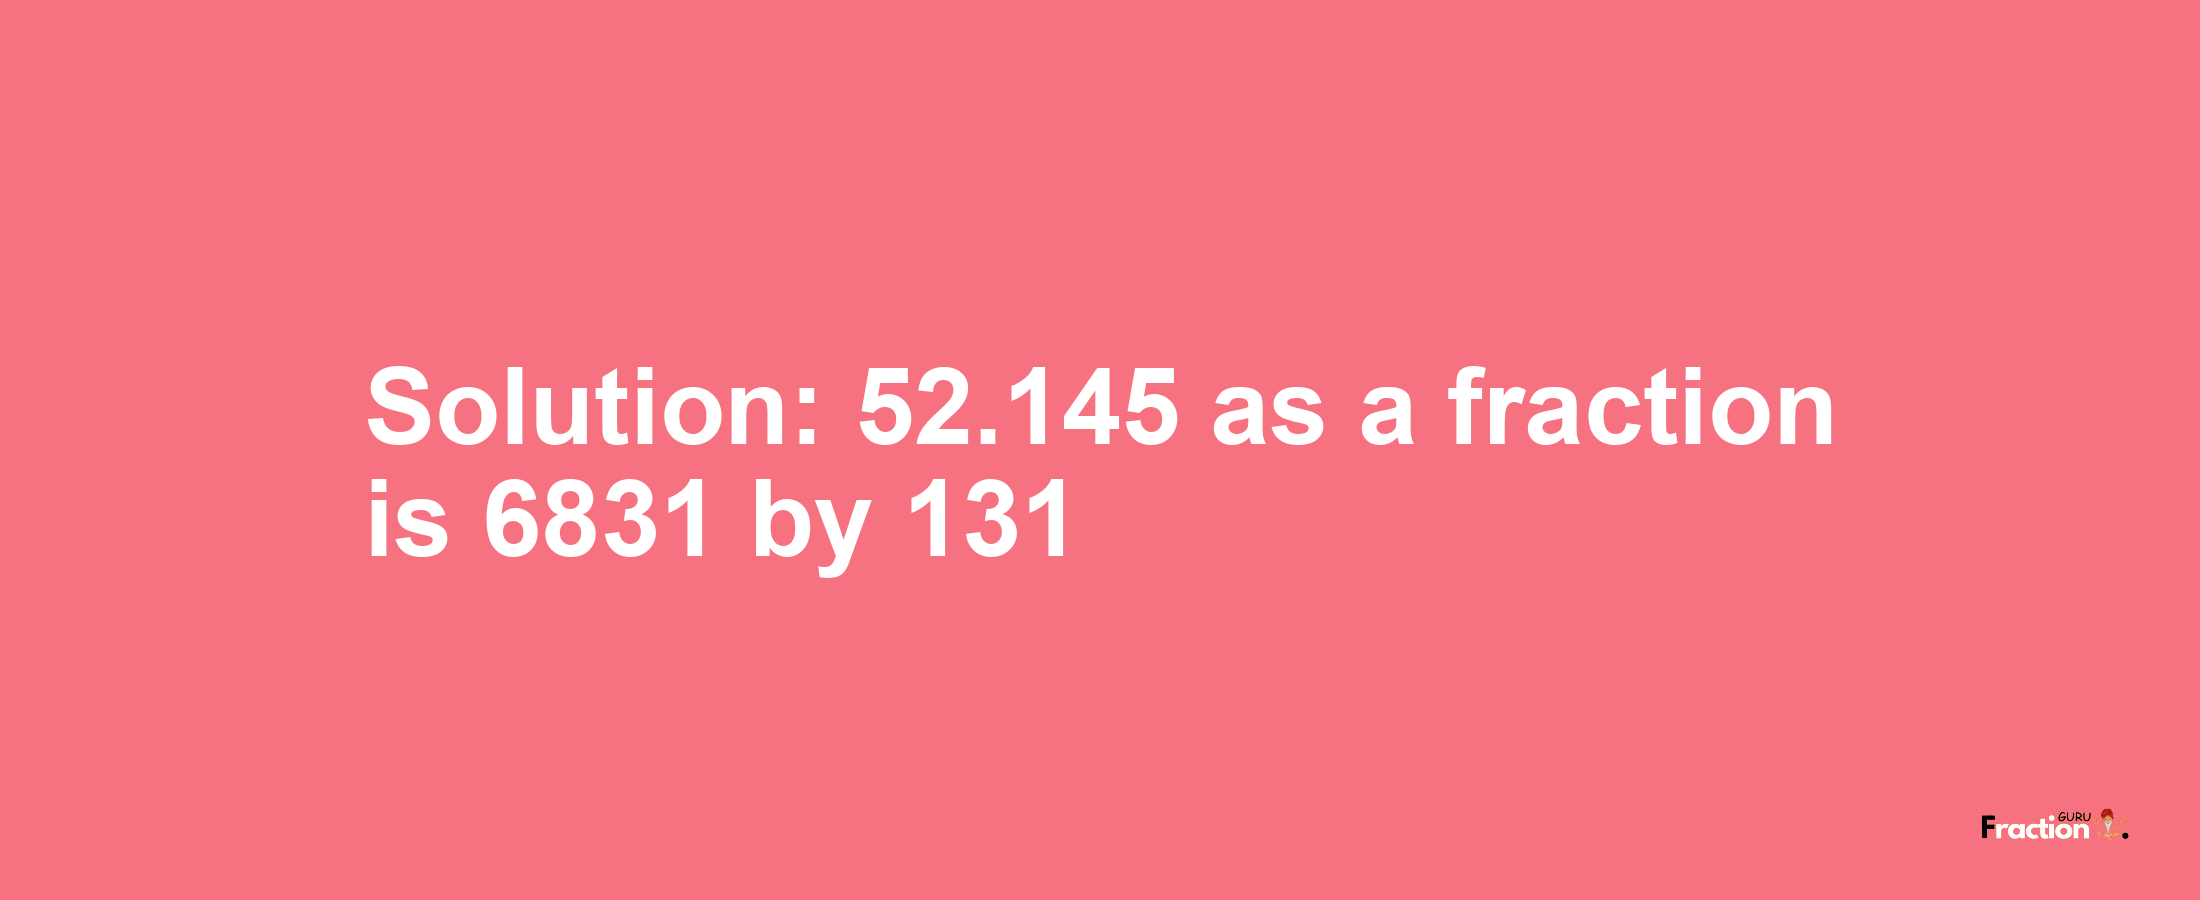 Solution:52.145 as a fraction is 6831/131